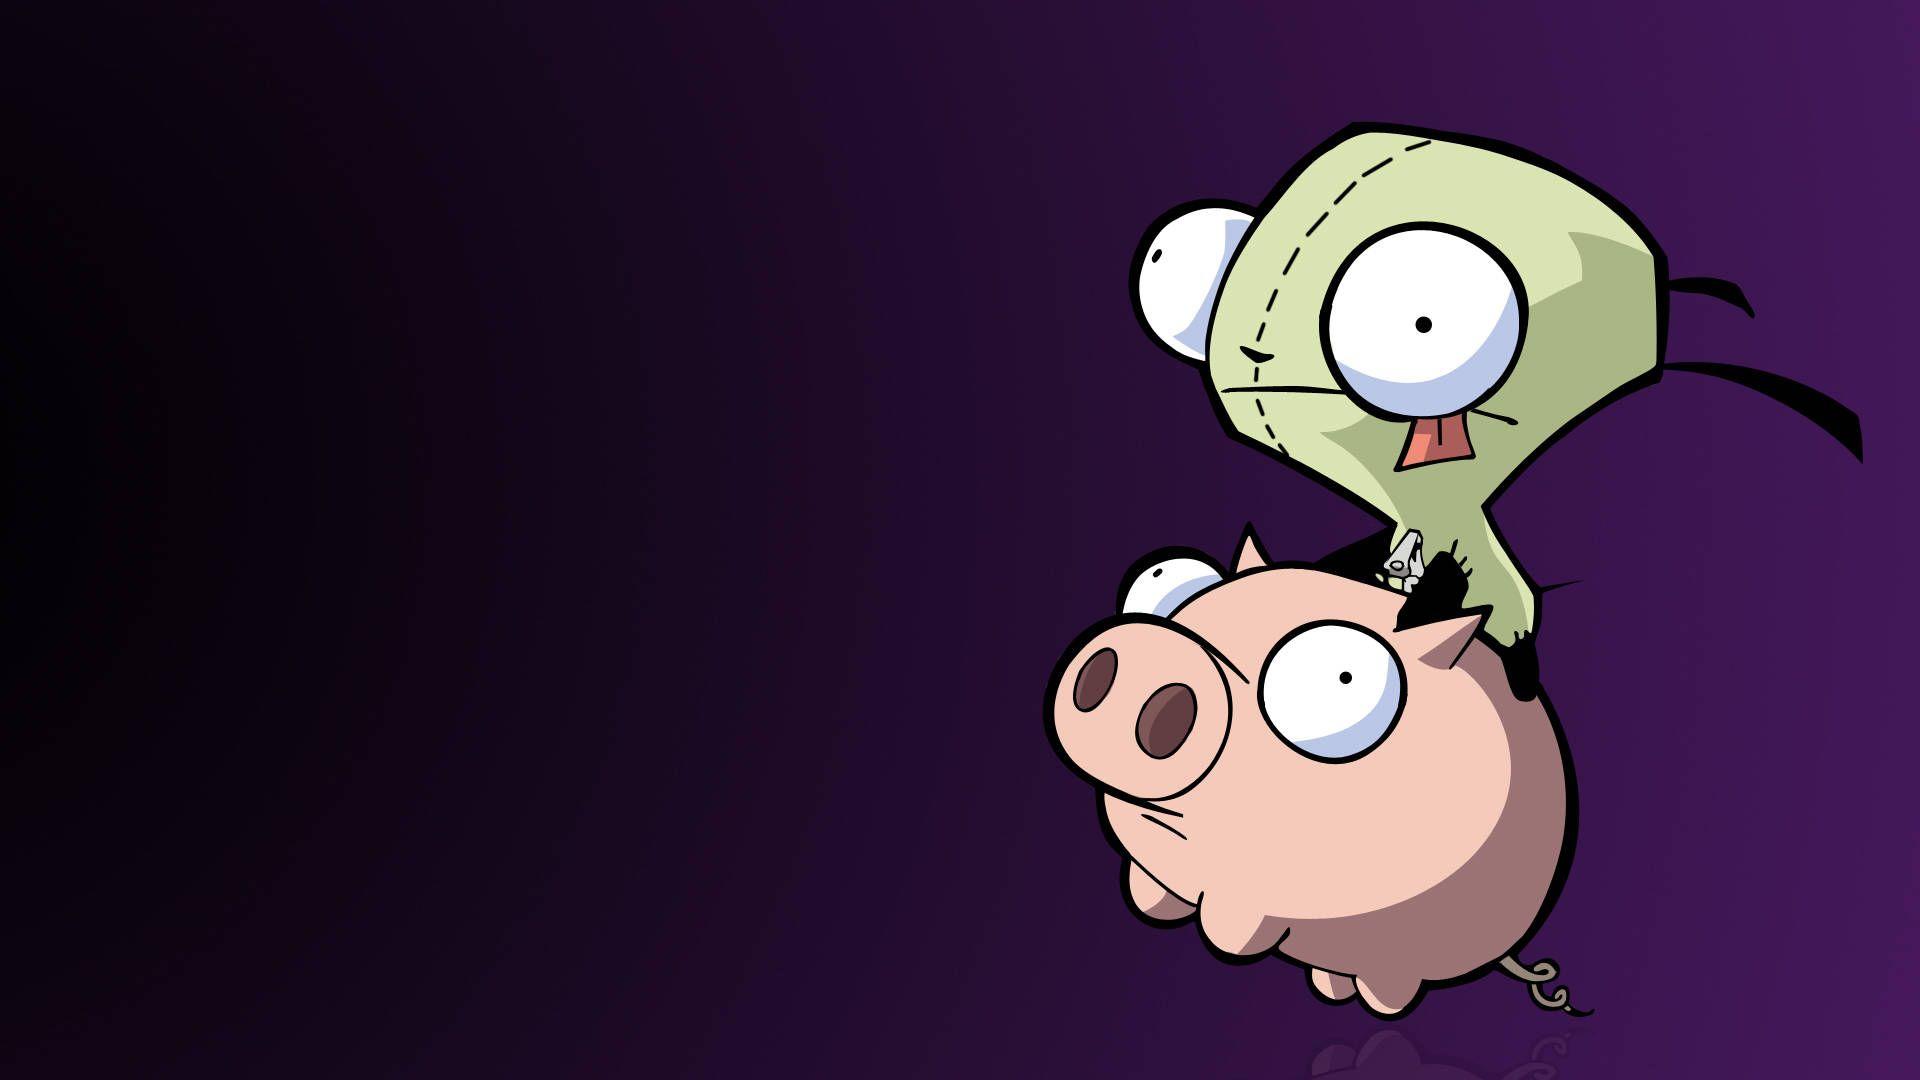 Invader Zim Wallpapers 1920x1080PX Wallpapers Invader Zim.